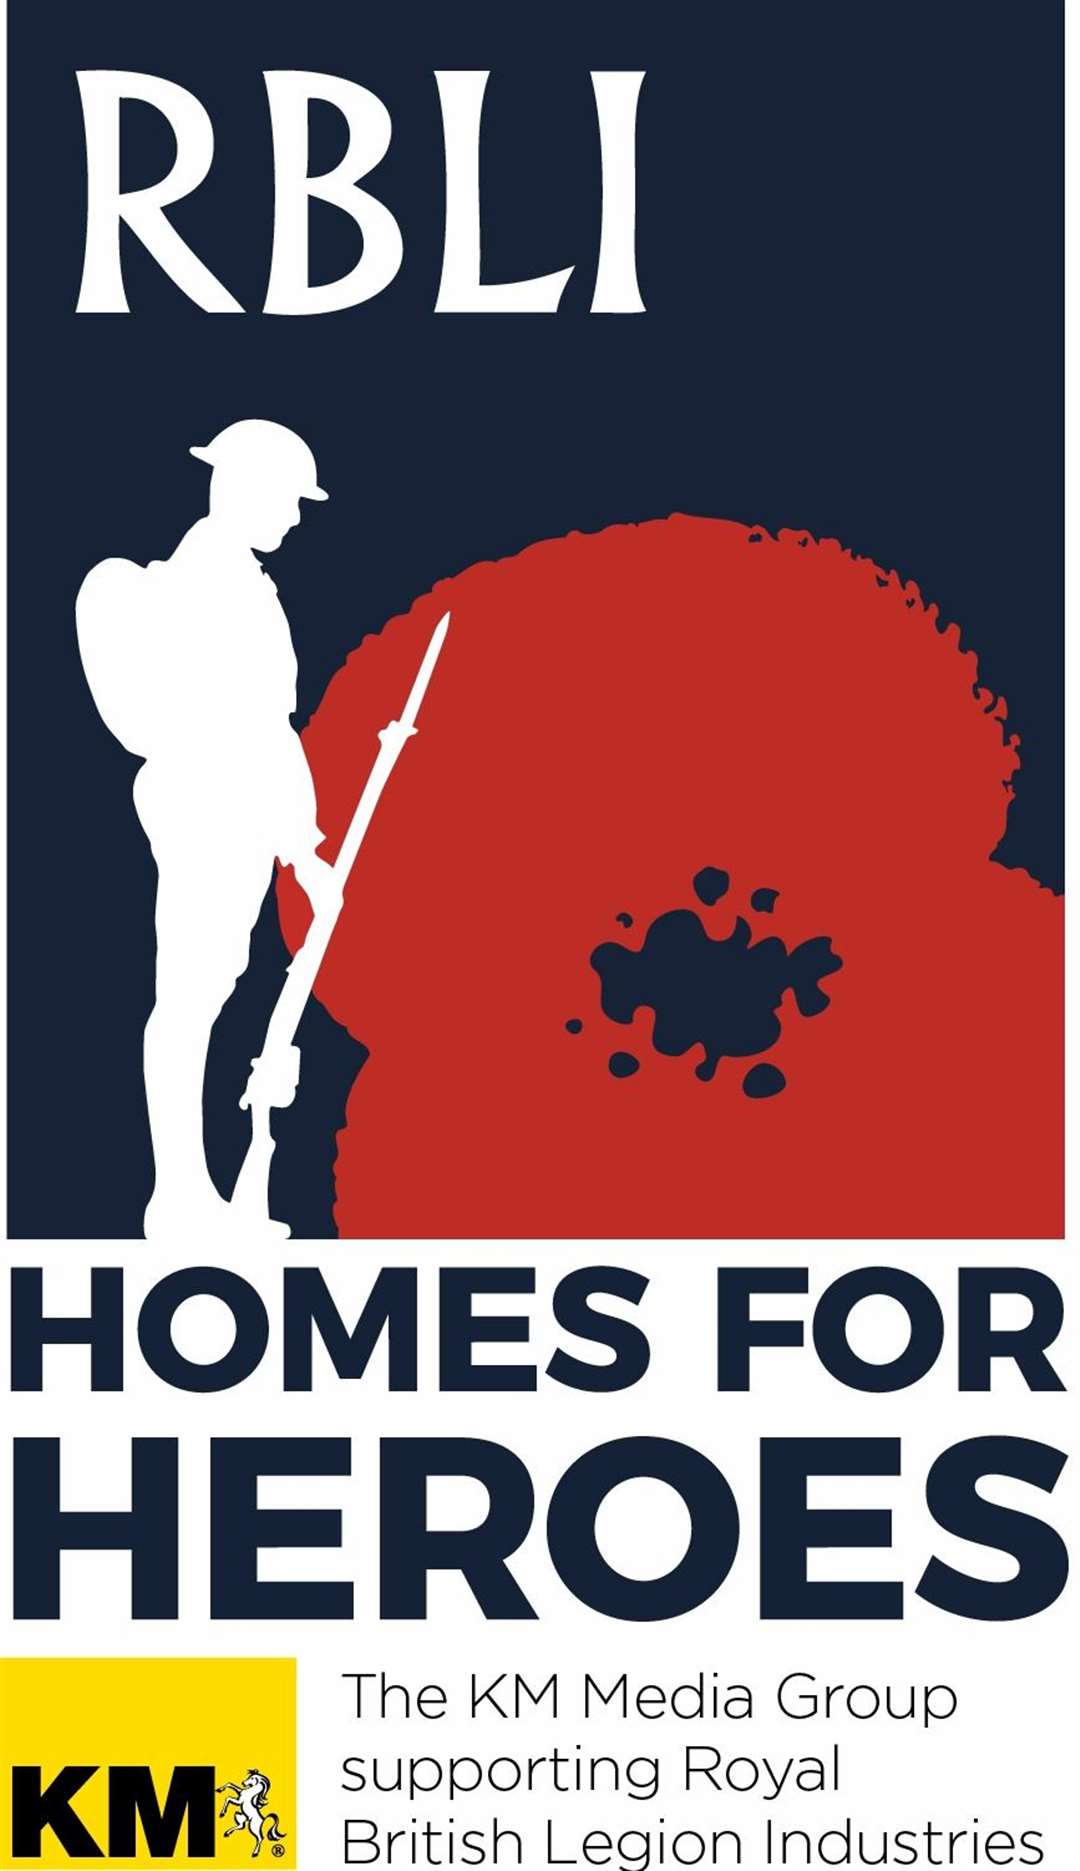 The Homes for Heroes logo